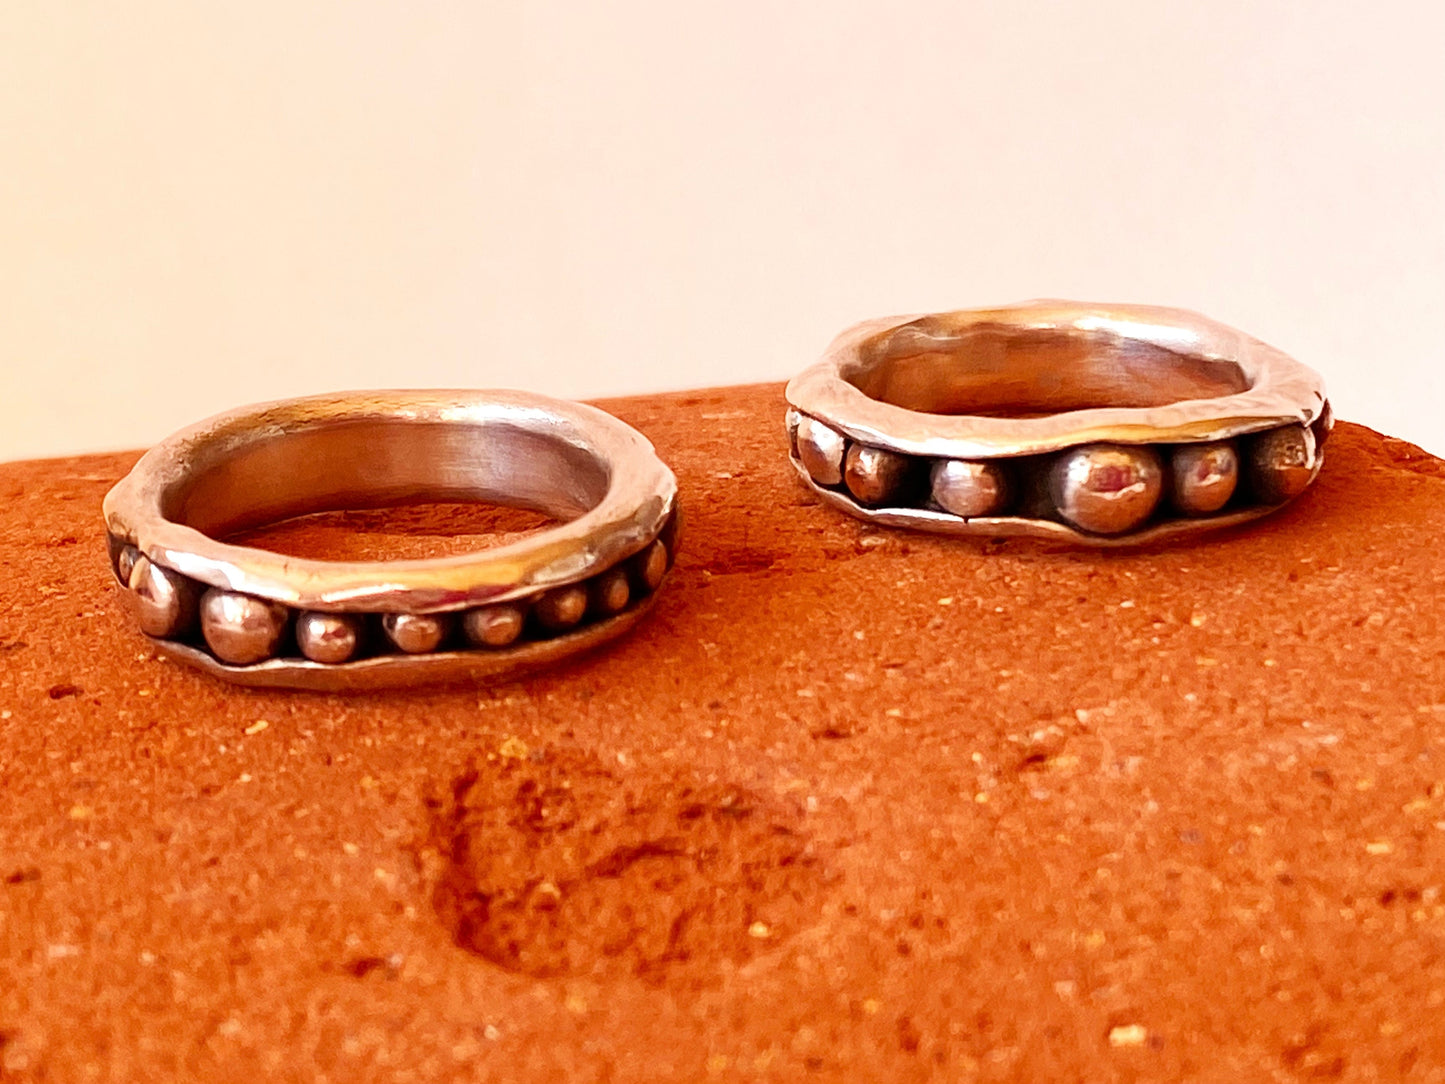 STACK OF TWO PEAPOD RINGS - Two one-of-a-kind hand-crafted sterling silver rings. Outer band wraps around interior sterling silver or antique bronze "peas." Can be ordered in any ring size. Style: rustic, boho, funky, organic, earthy yet elegant.